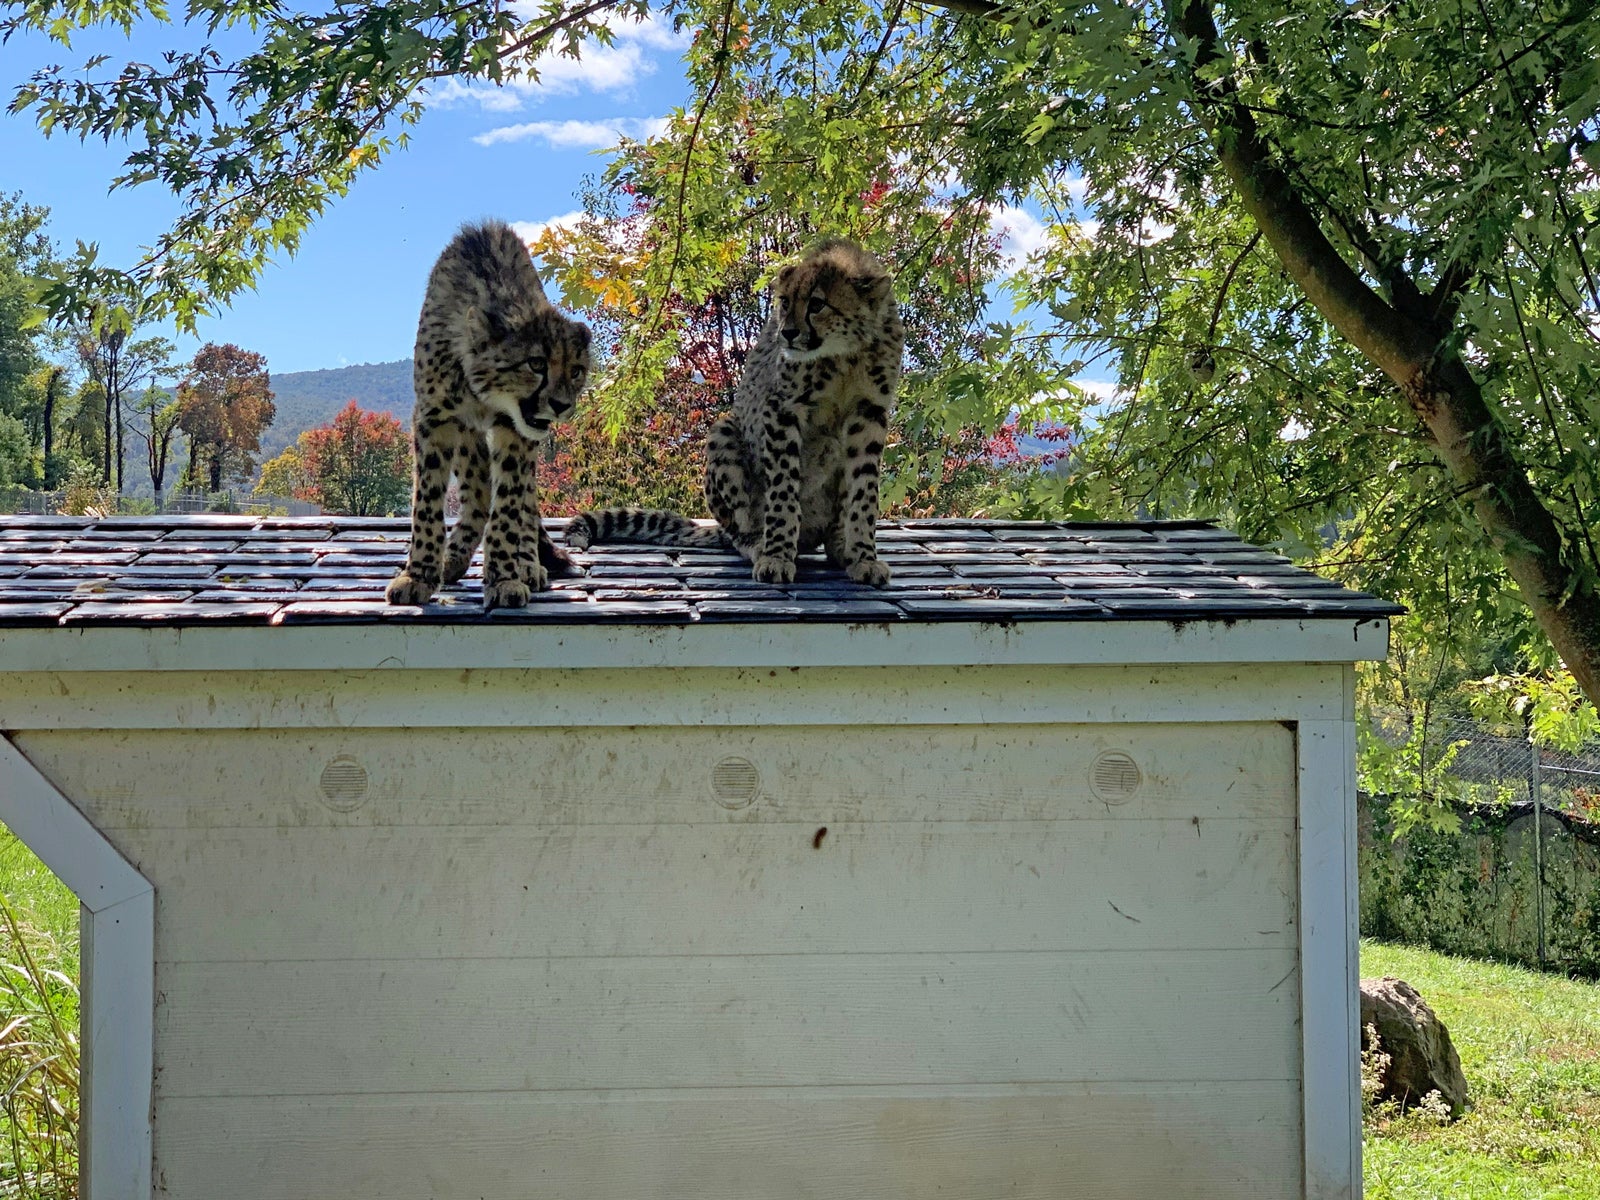 Two young cheetahs stand on top of the roof of their small den inside the grassy yard of their habitat at the Smithsonian Conservation Biology Institute